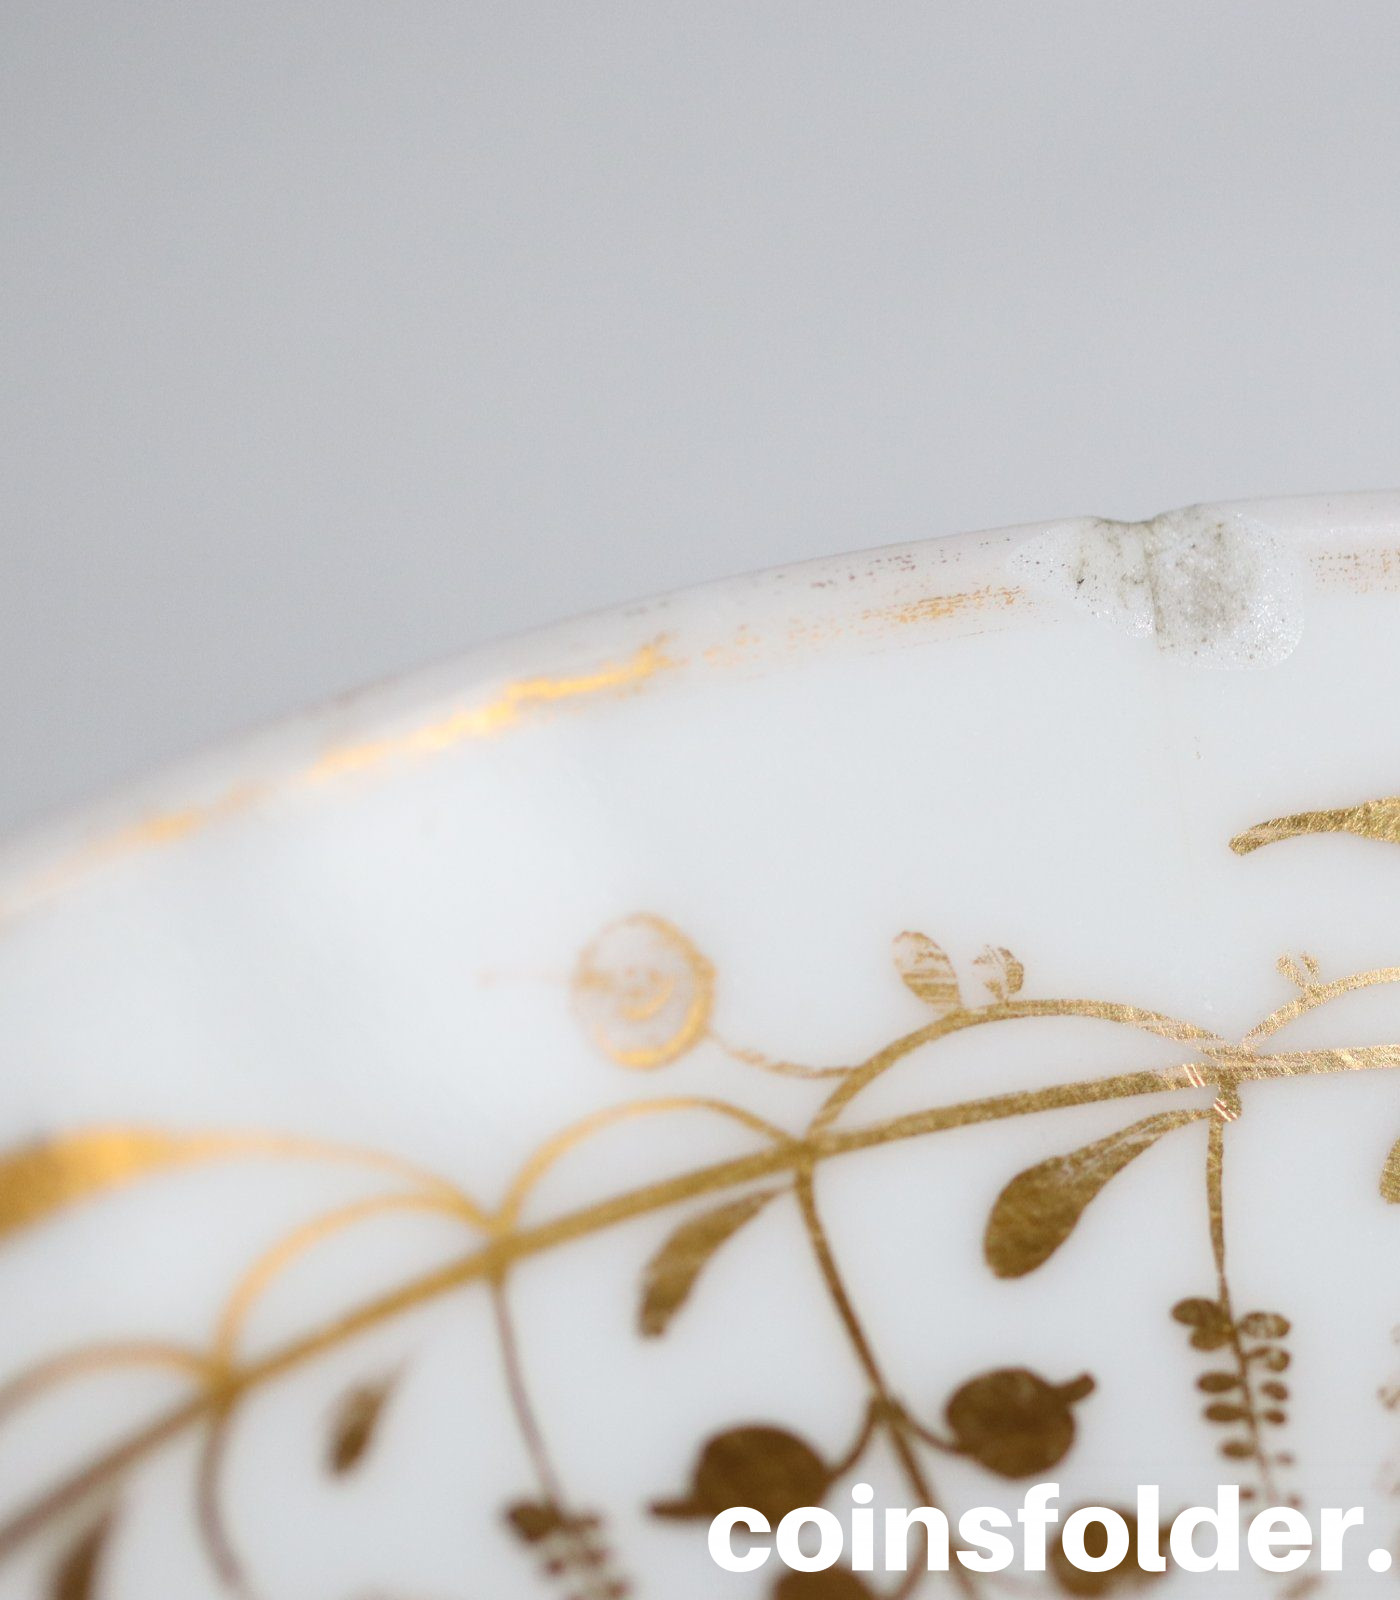 Antique Imperial Gilded Porcelain Bone China Cup with Caucer 1800s